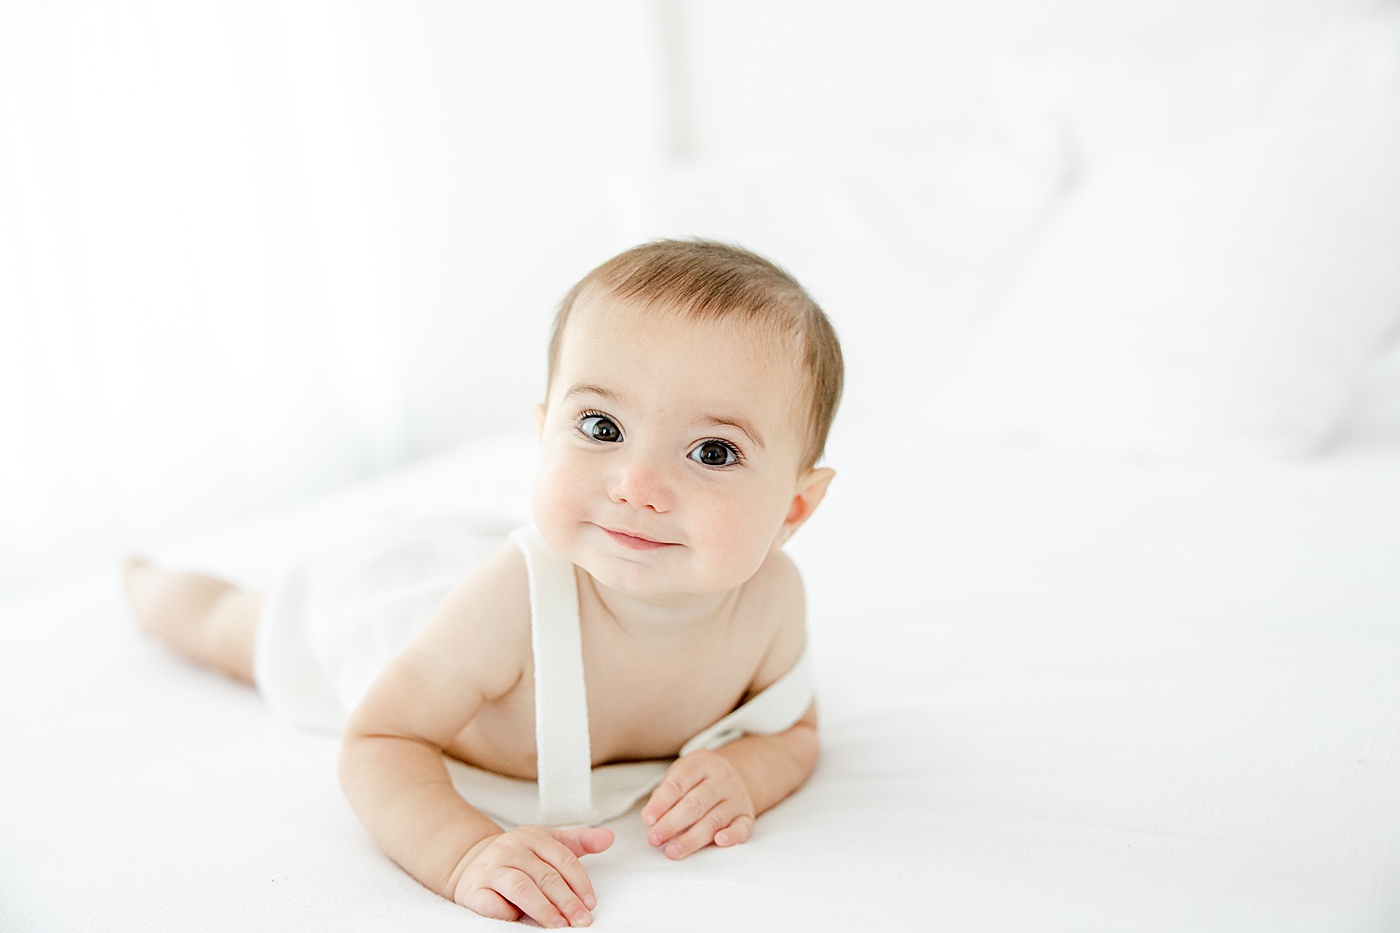 7 month old milestone session in studio in Fairfield County, CT | Kristin Wood Photography